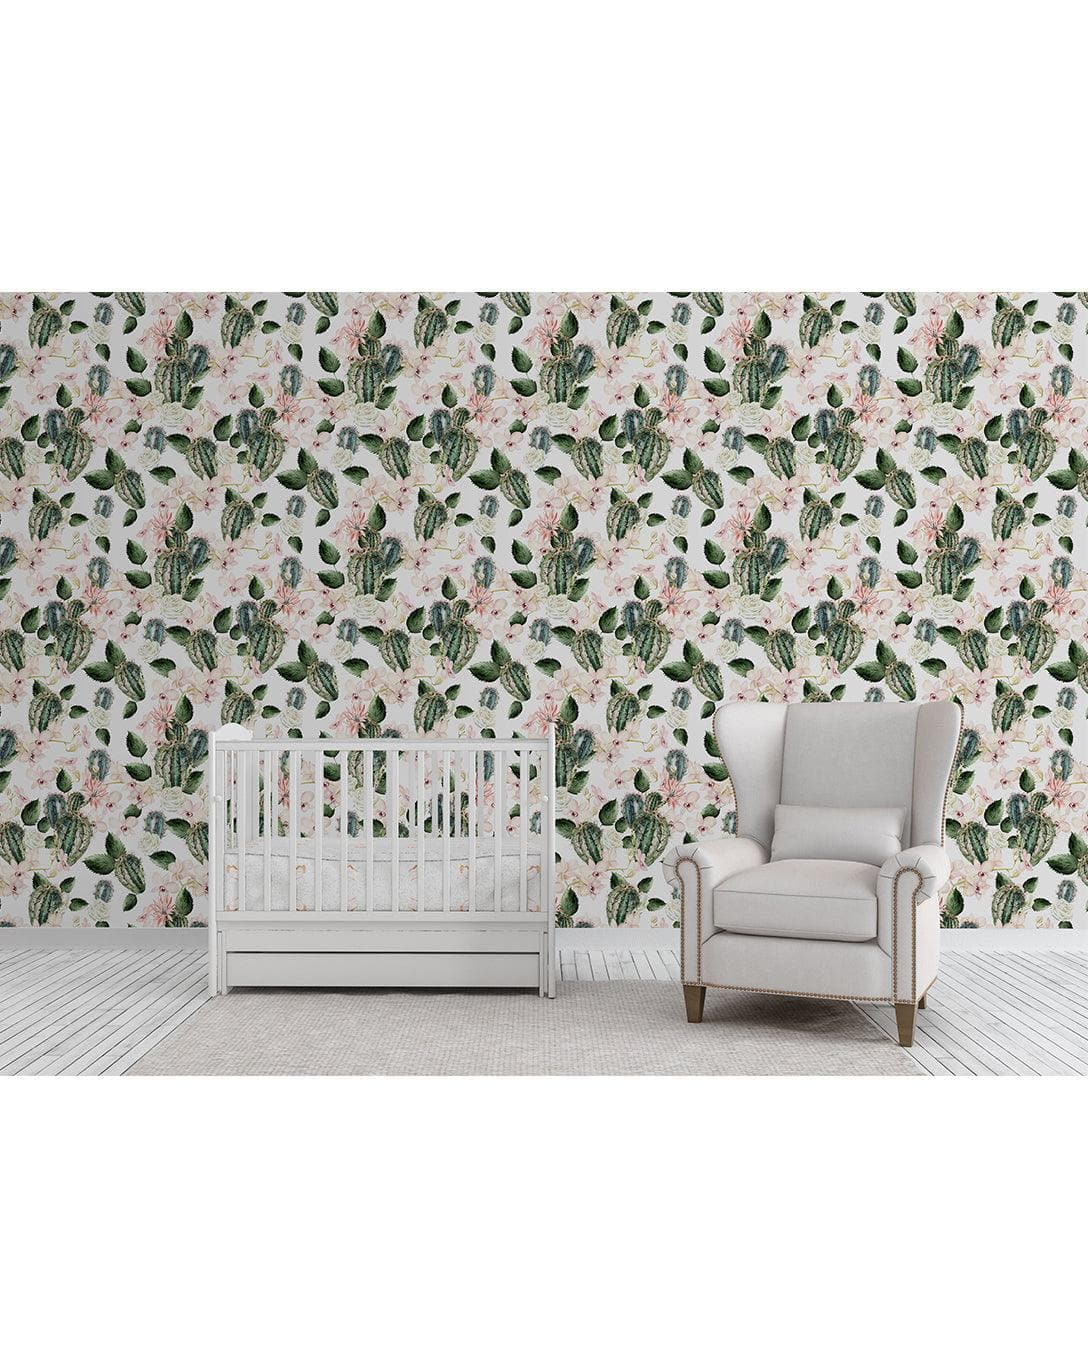 Floral Hibiscus Roses and Greenery Wallpaper Floral Green Cactus Rose and Orchids Removable Wallpaper 